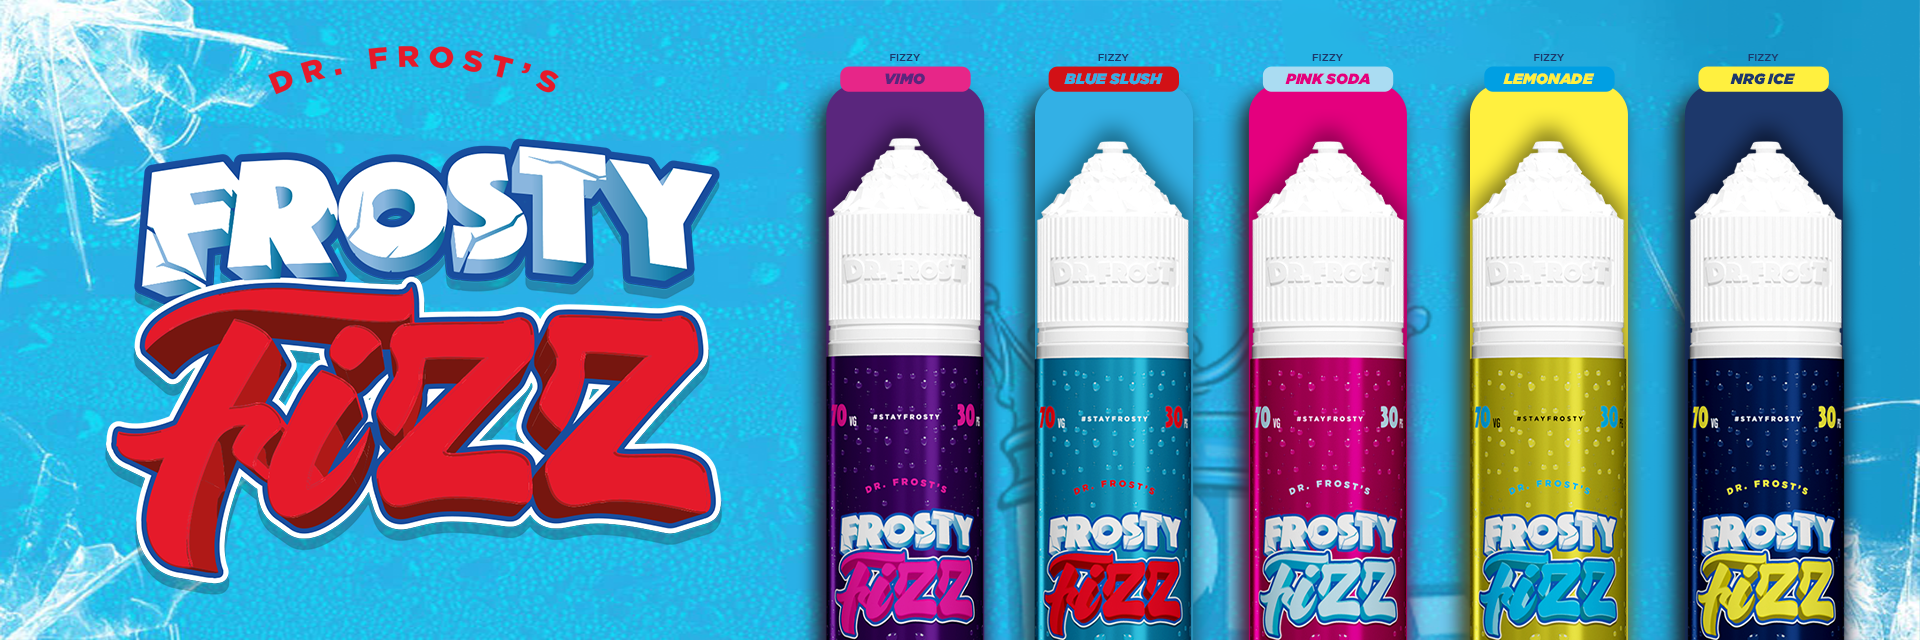 DR. FROST Frosty Fizz Mobile Banner